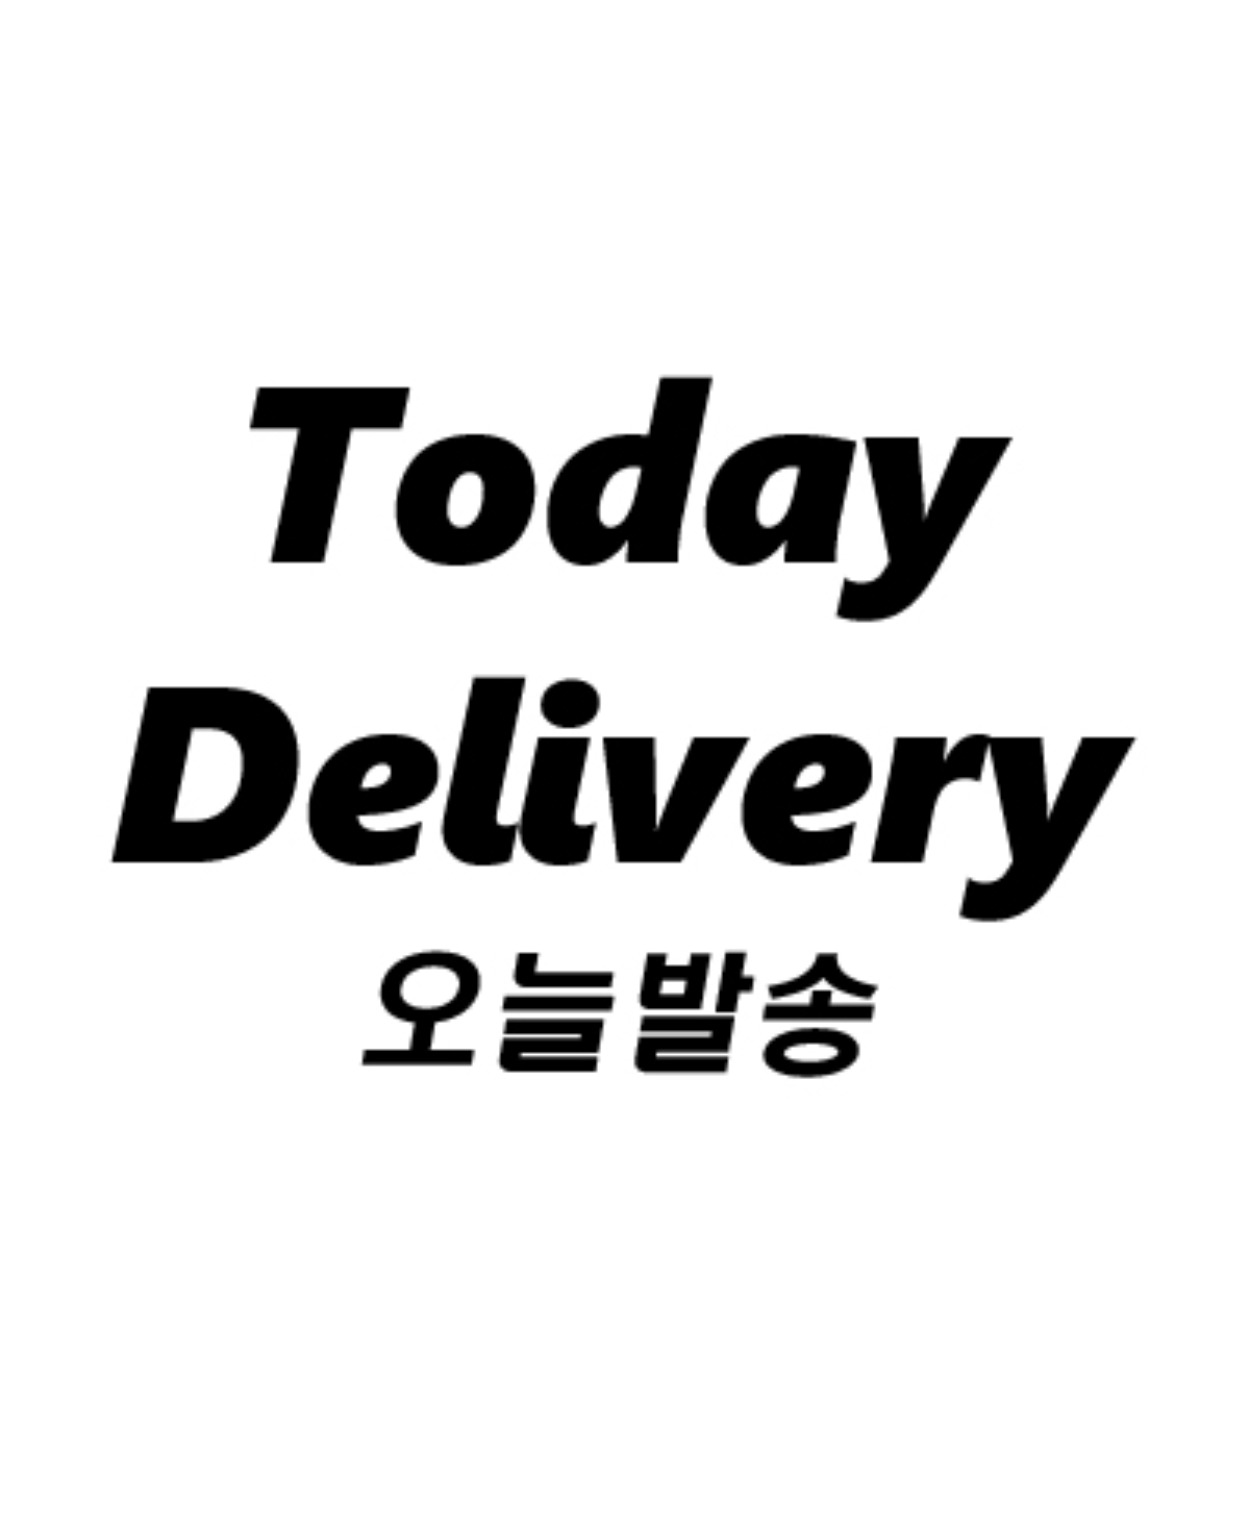 Today Delivery 오늘발송